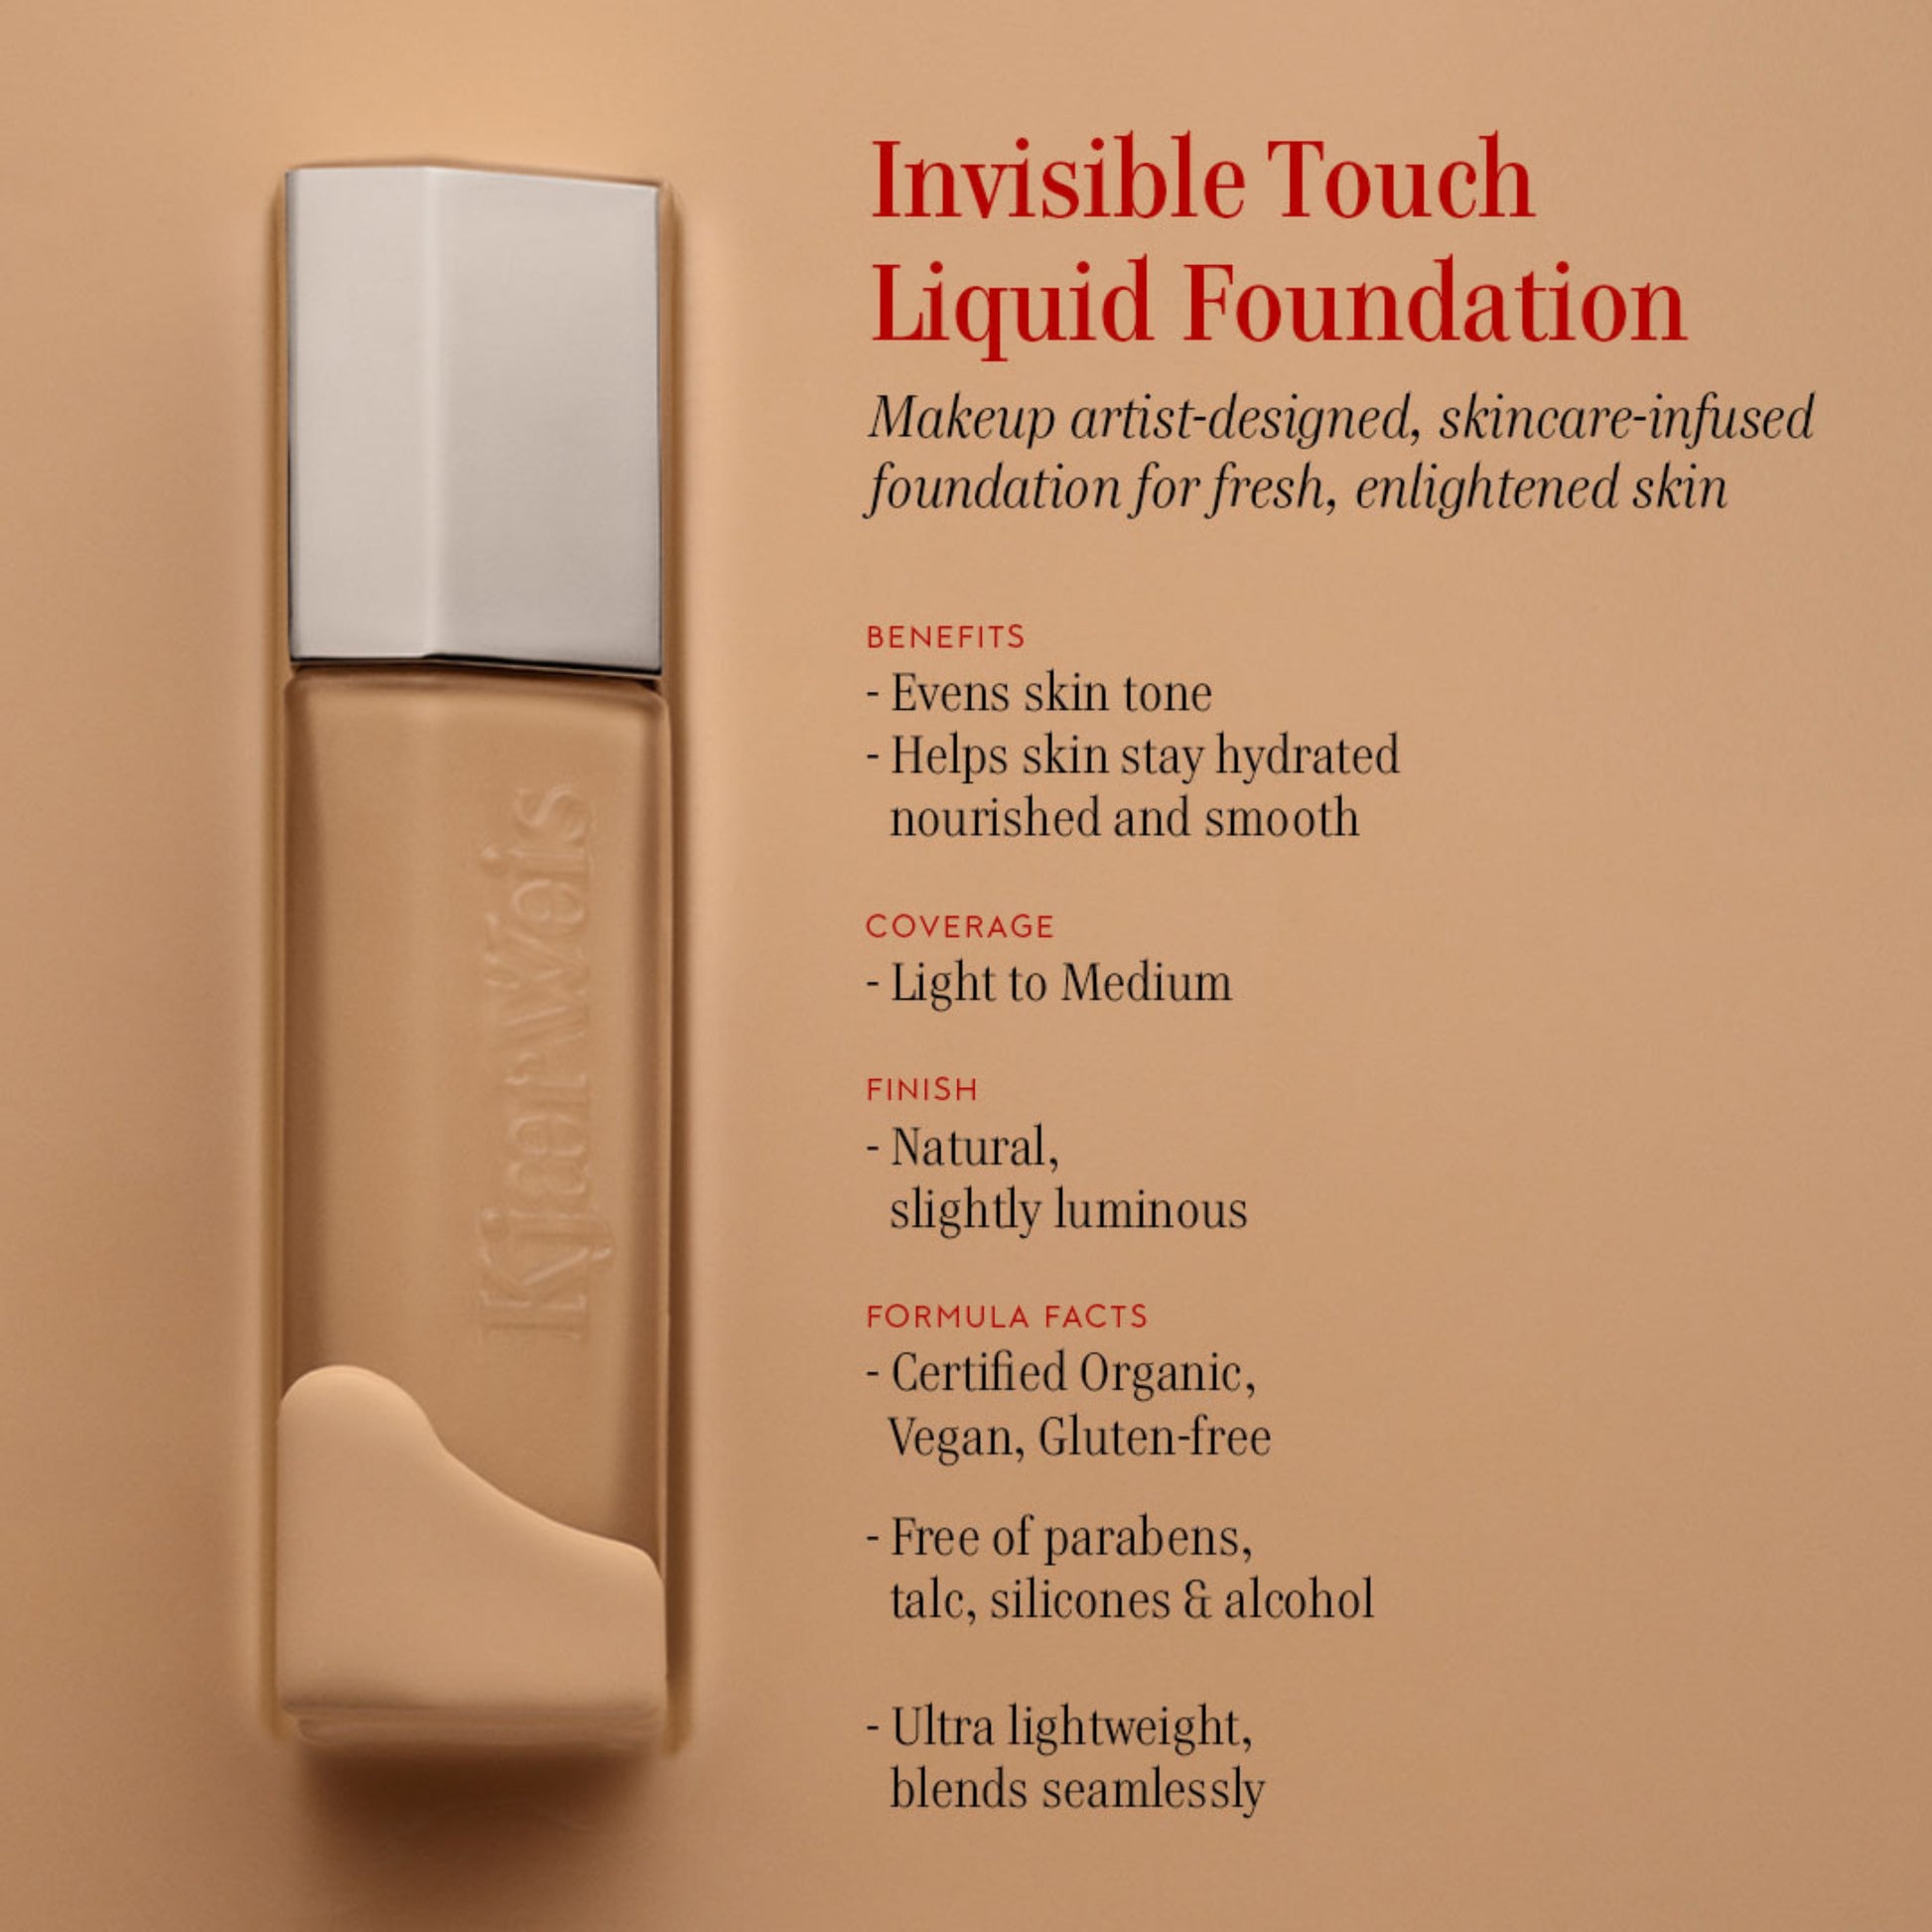 KW Invisible Touch Liquid Foundation bottle on a beige background. The text next to it reads: Invisible Touch Liquid Foundation. Makeup artist-designed, skincare-infused foundation for fresh, enlightened skin. Benefits: evens skin tone; helps skin stay hydrated nourished and smooth. Coverage: light to medium. Finish: natural, slightly luminous. Formula facts: certified organic, vegan, gluten-free; free of parabens, talc, silicones and alcohol; ultra lightweight, blends seamlessly. 